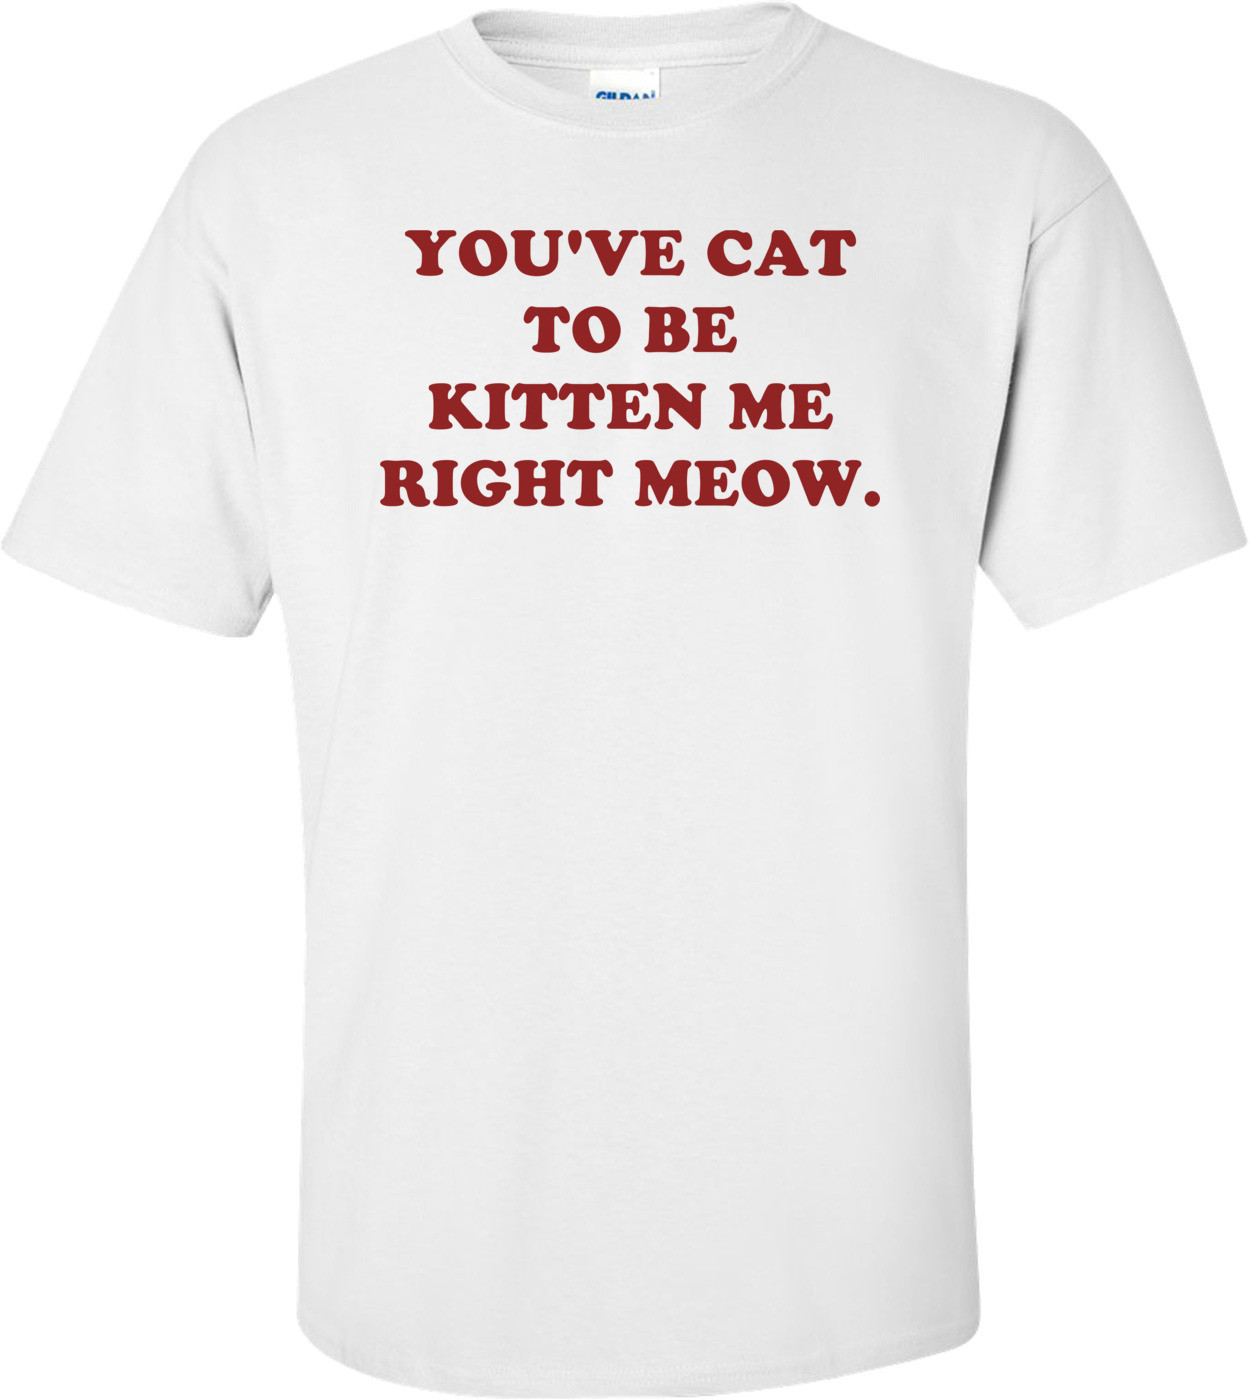 YOU'VE CAT TO BE KITTEN ME RIGHT MEOW.